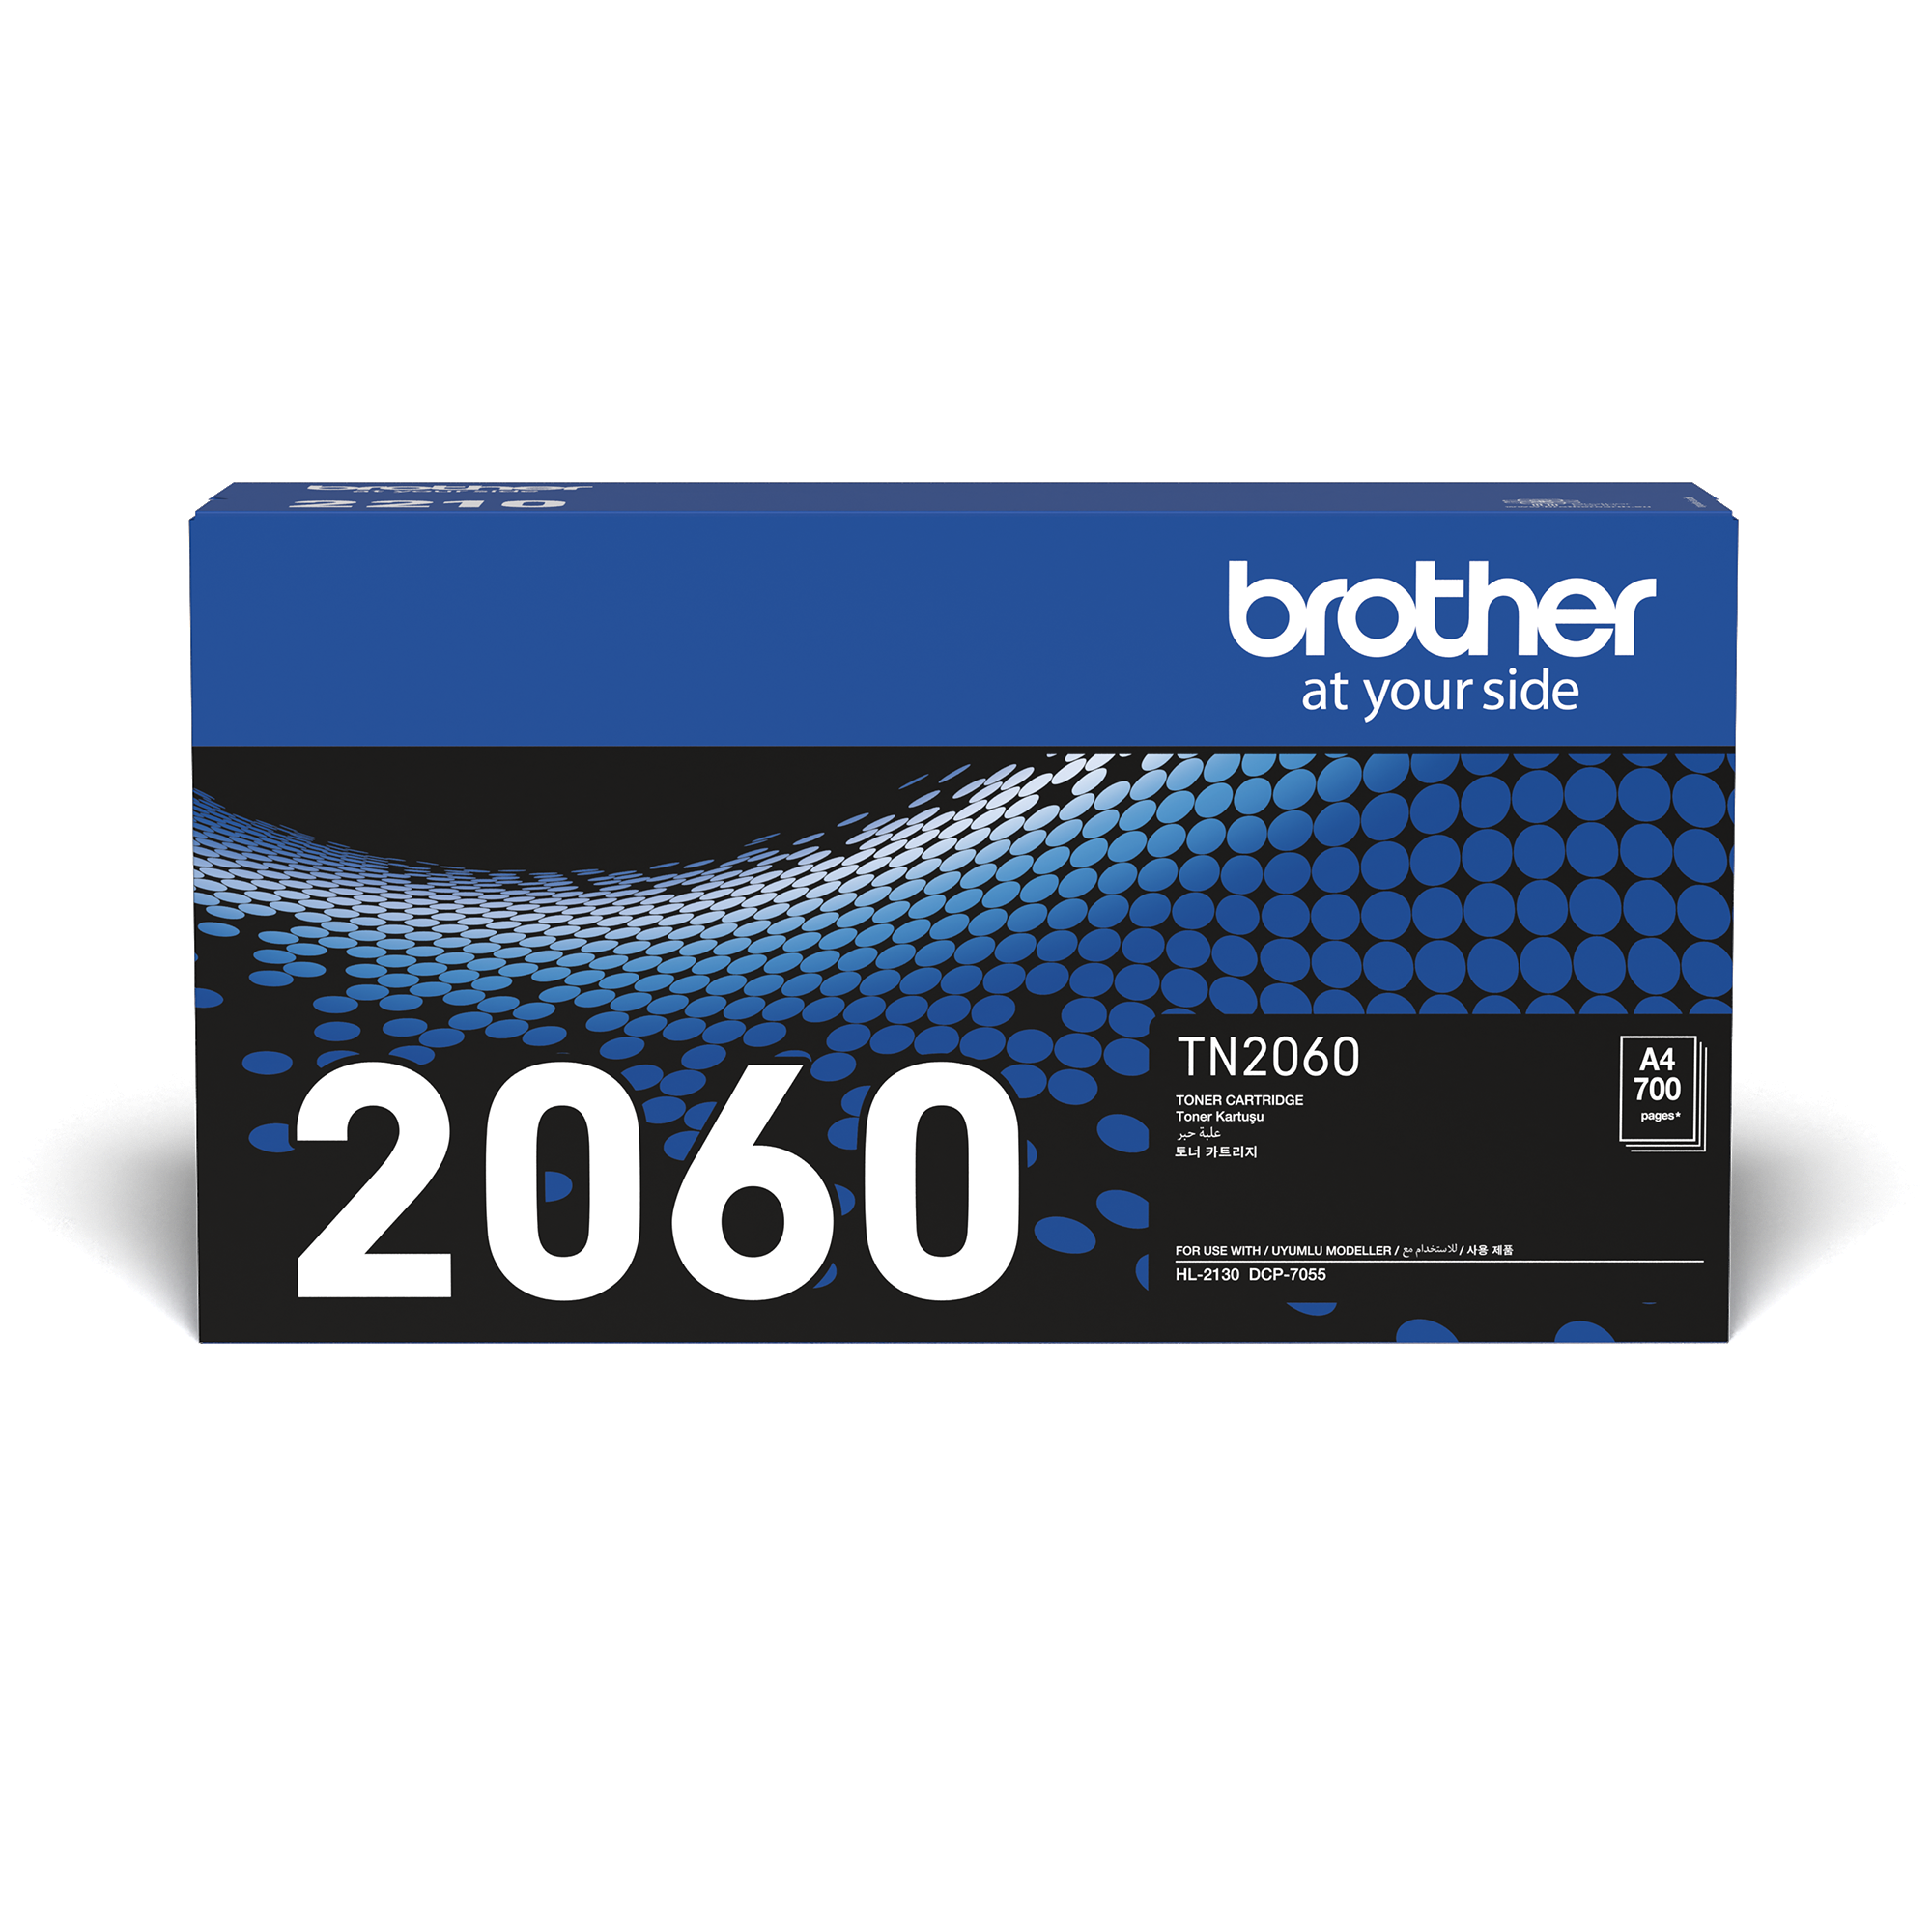 Brother TN2060 Toner Cartridge (700 Pages)